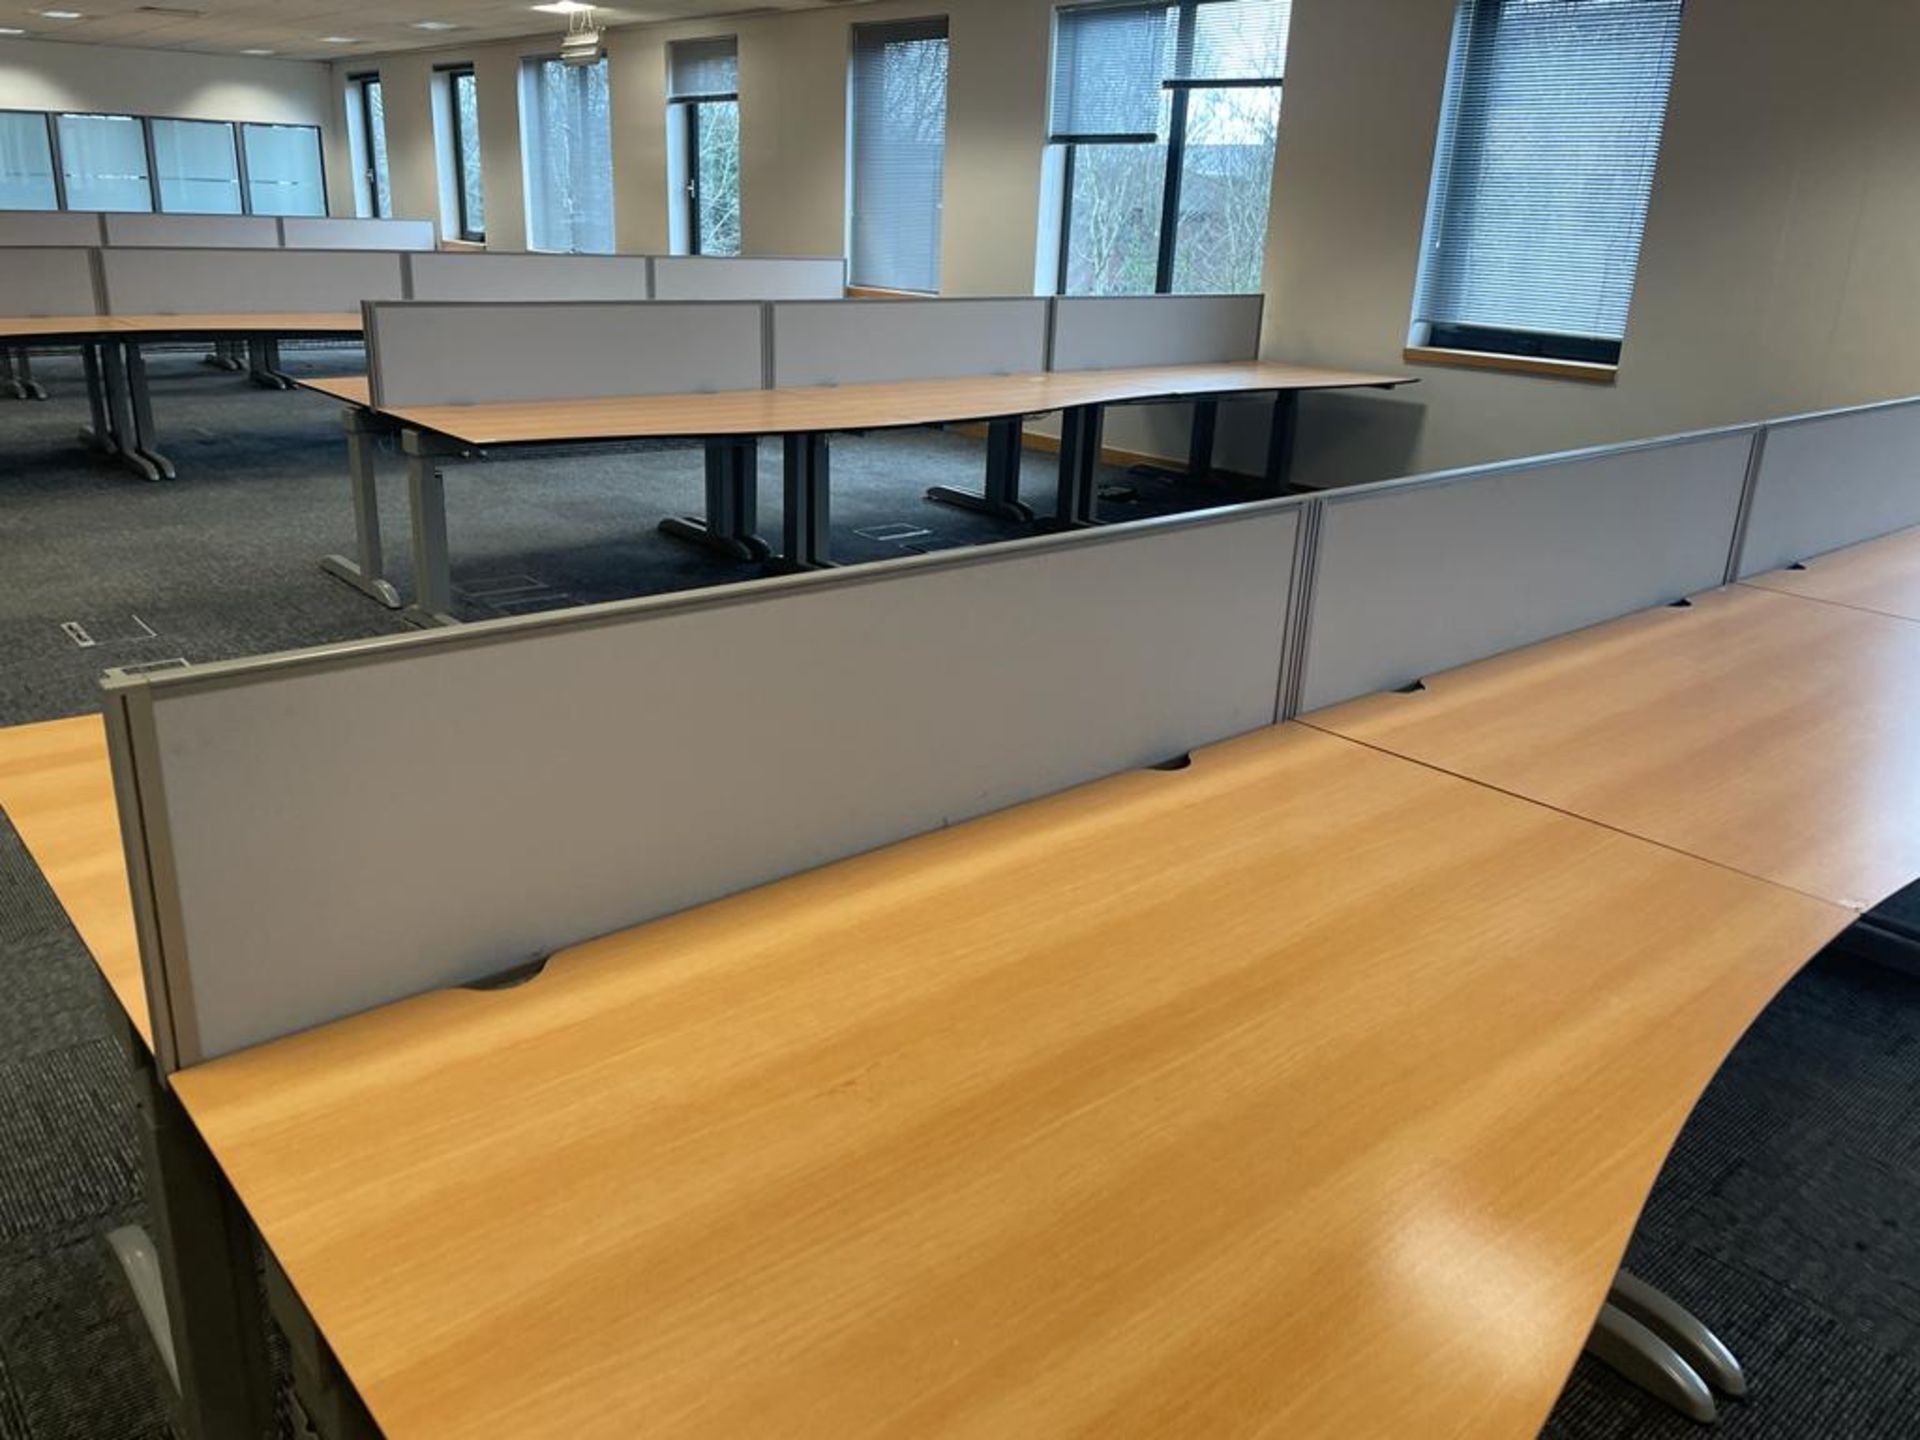 8 x Techo Wave Office Desks With Privacy Panels and Cable Tidy Cages - Beech Wood Finish - Image 18 of 20